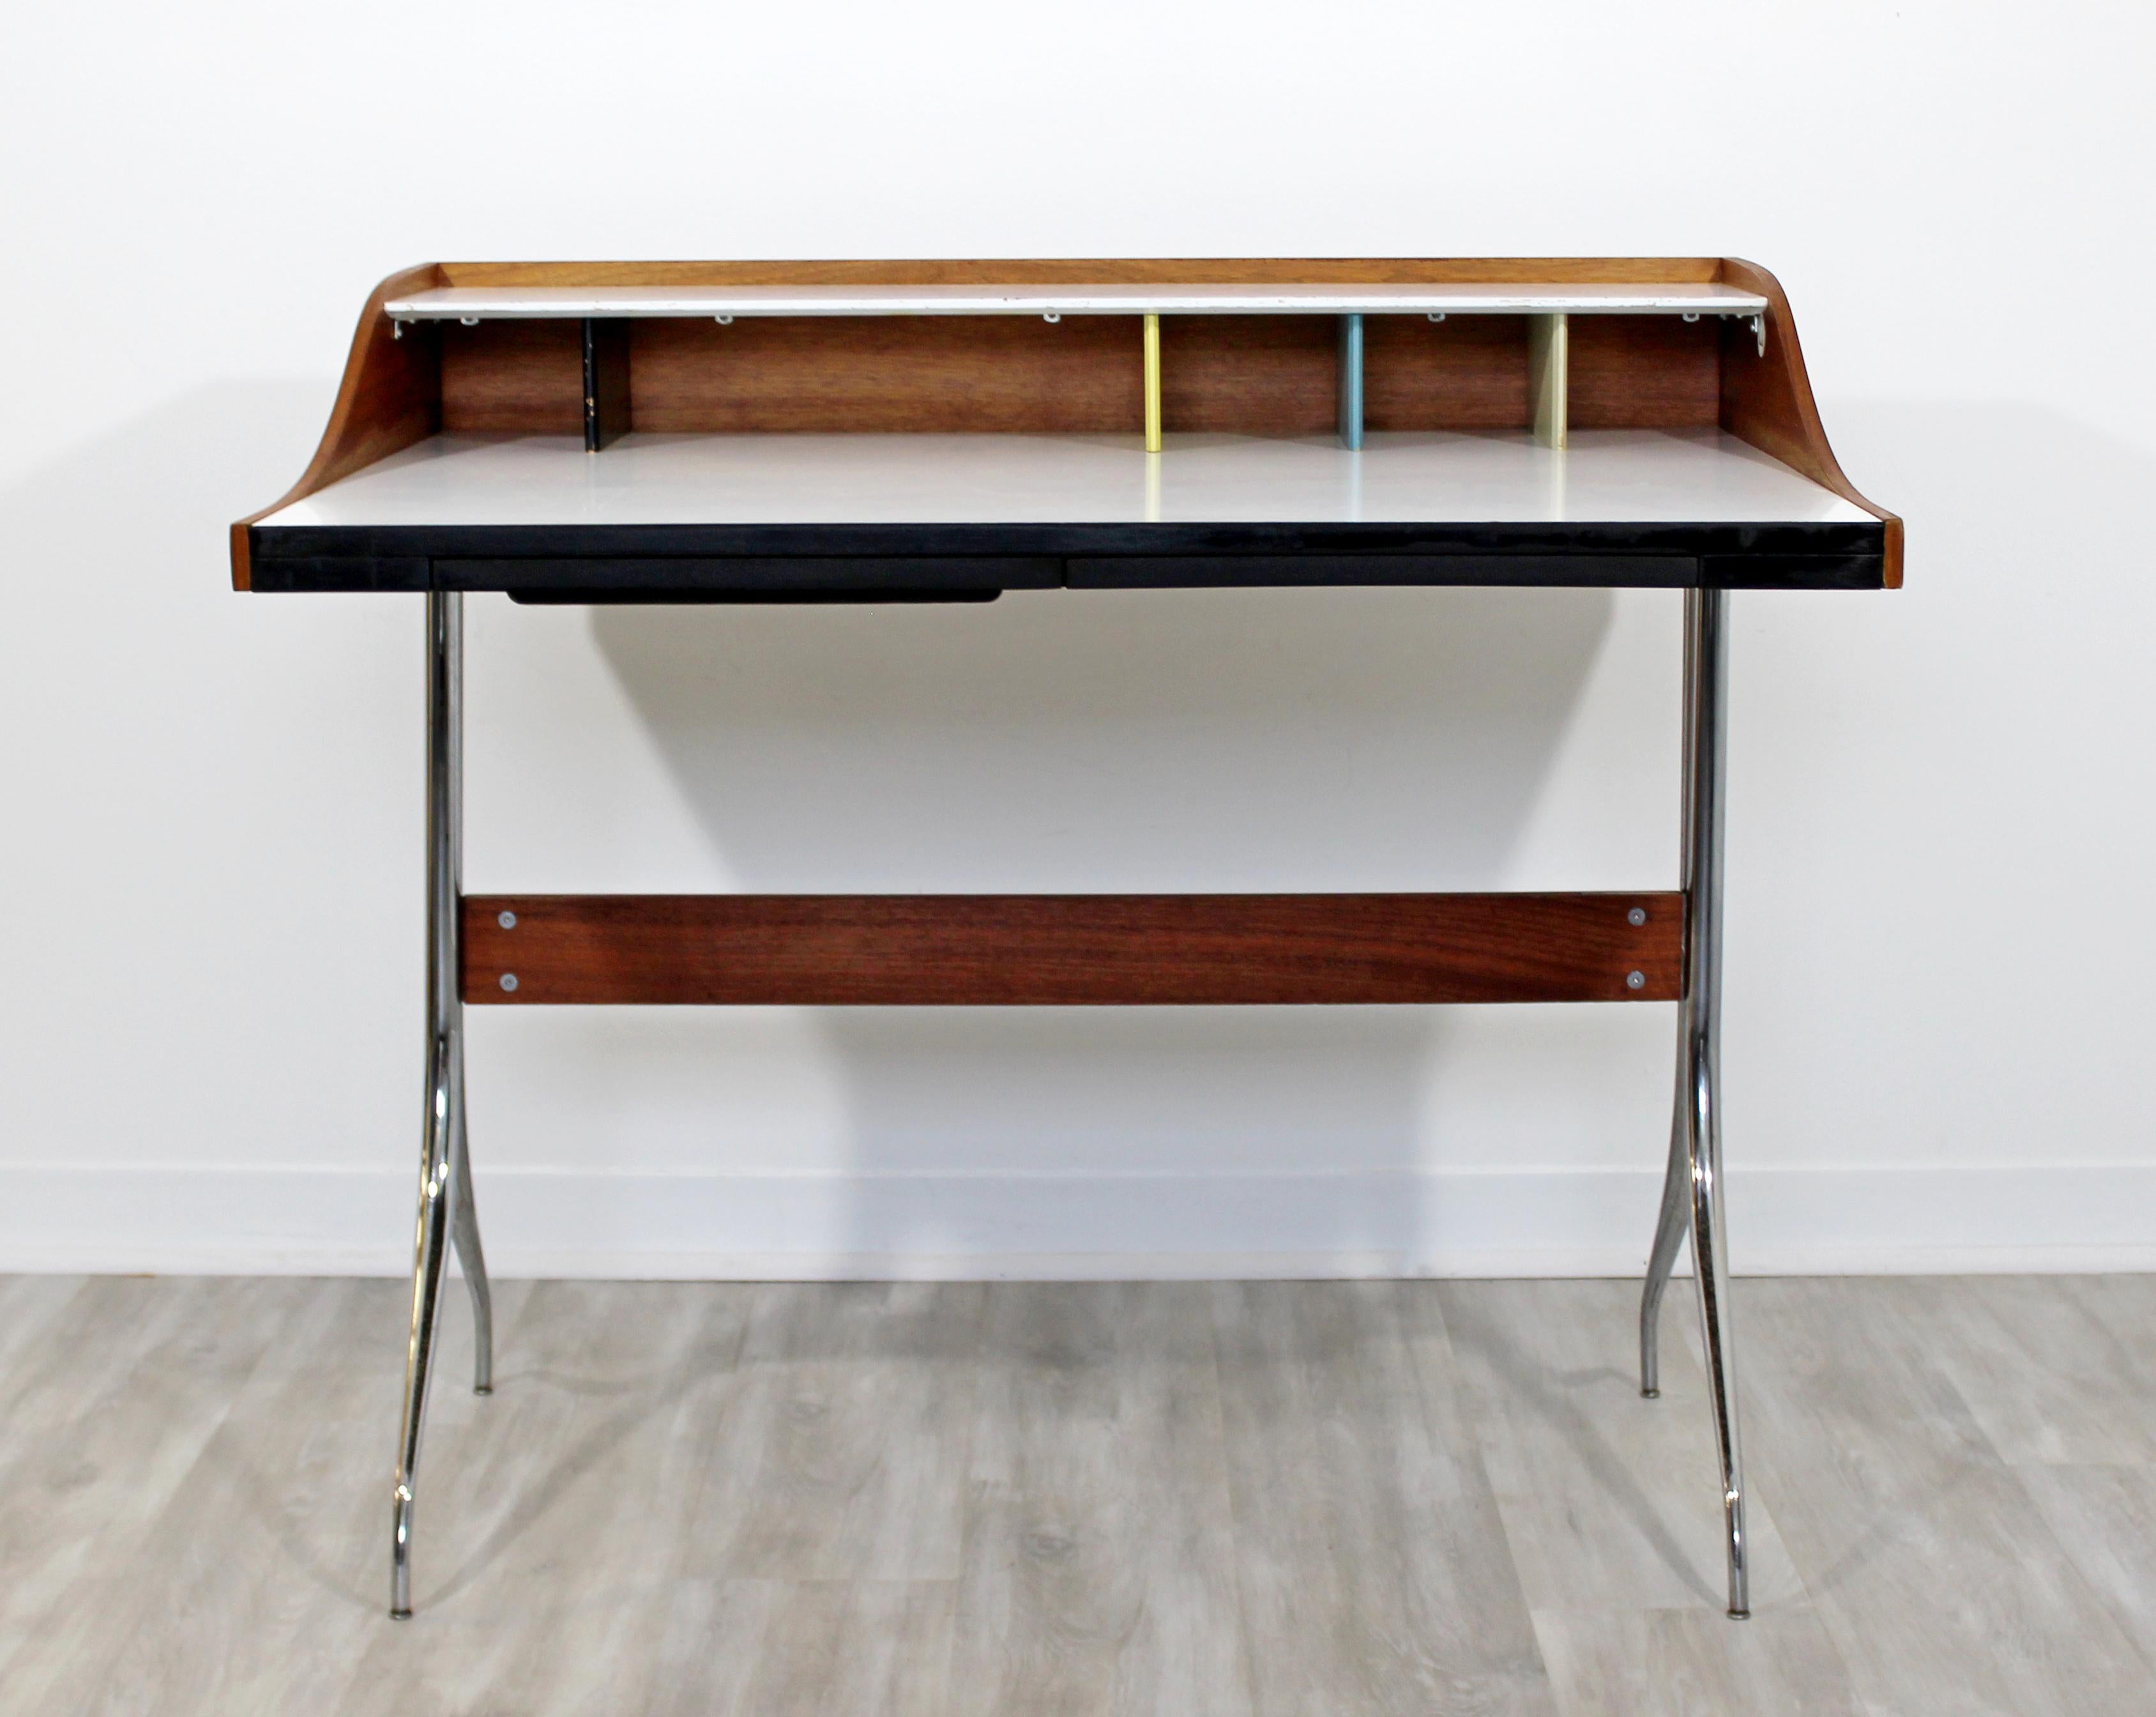 For your consideration is a rare early edition, swag leg desk by George Nelson for Herman Miller, with a single drawer, circa the 1950s. In very good vintage condition. The dimensions are 39